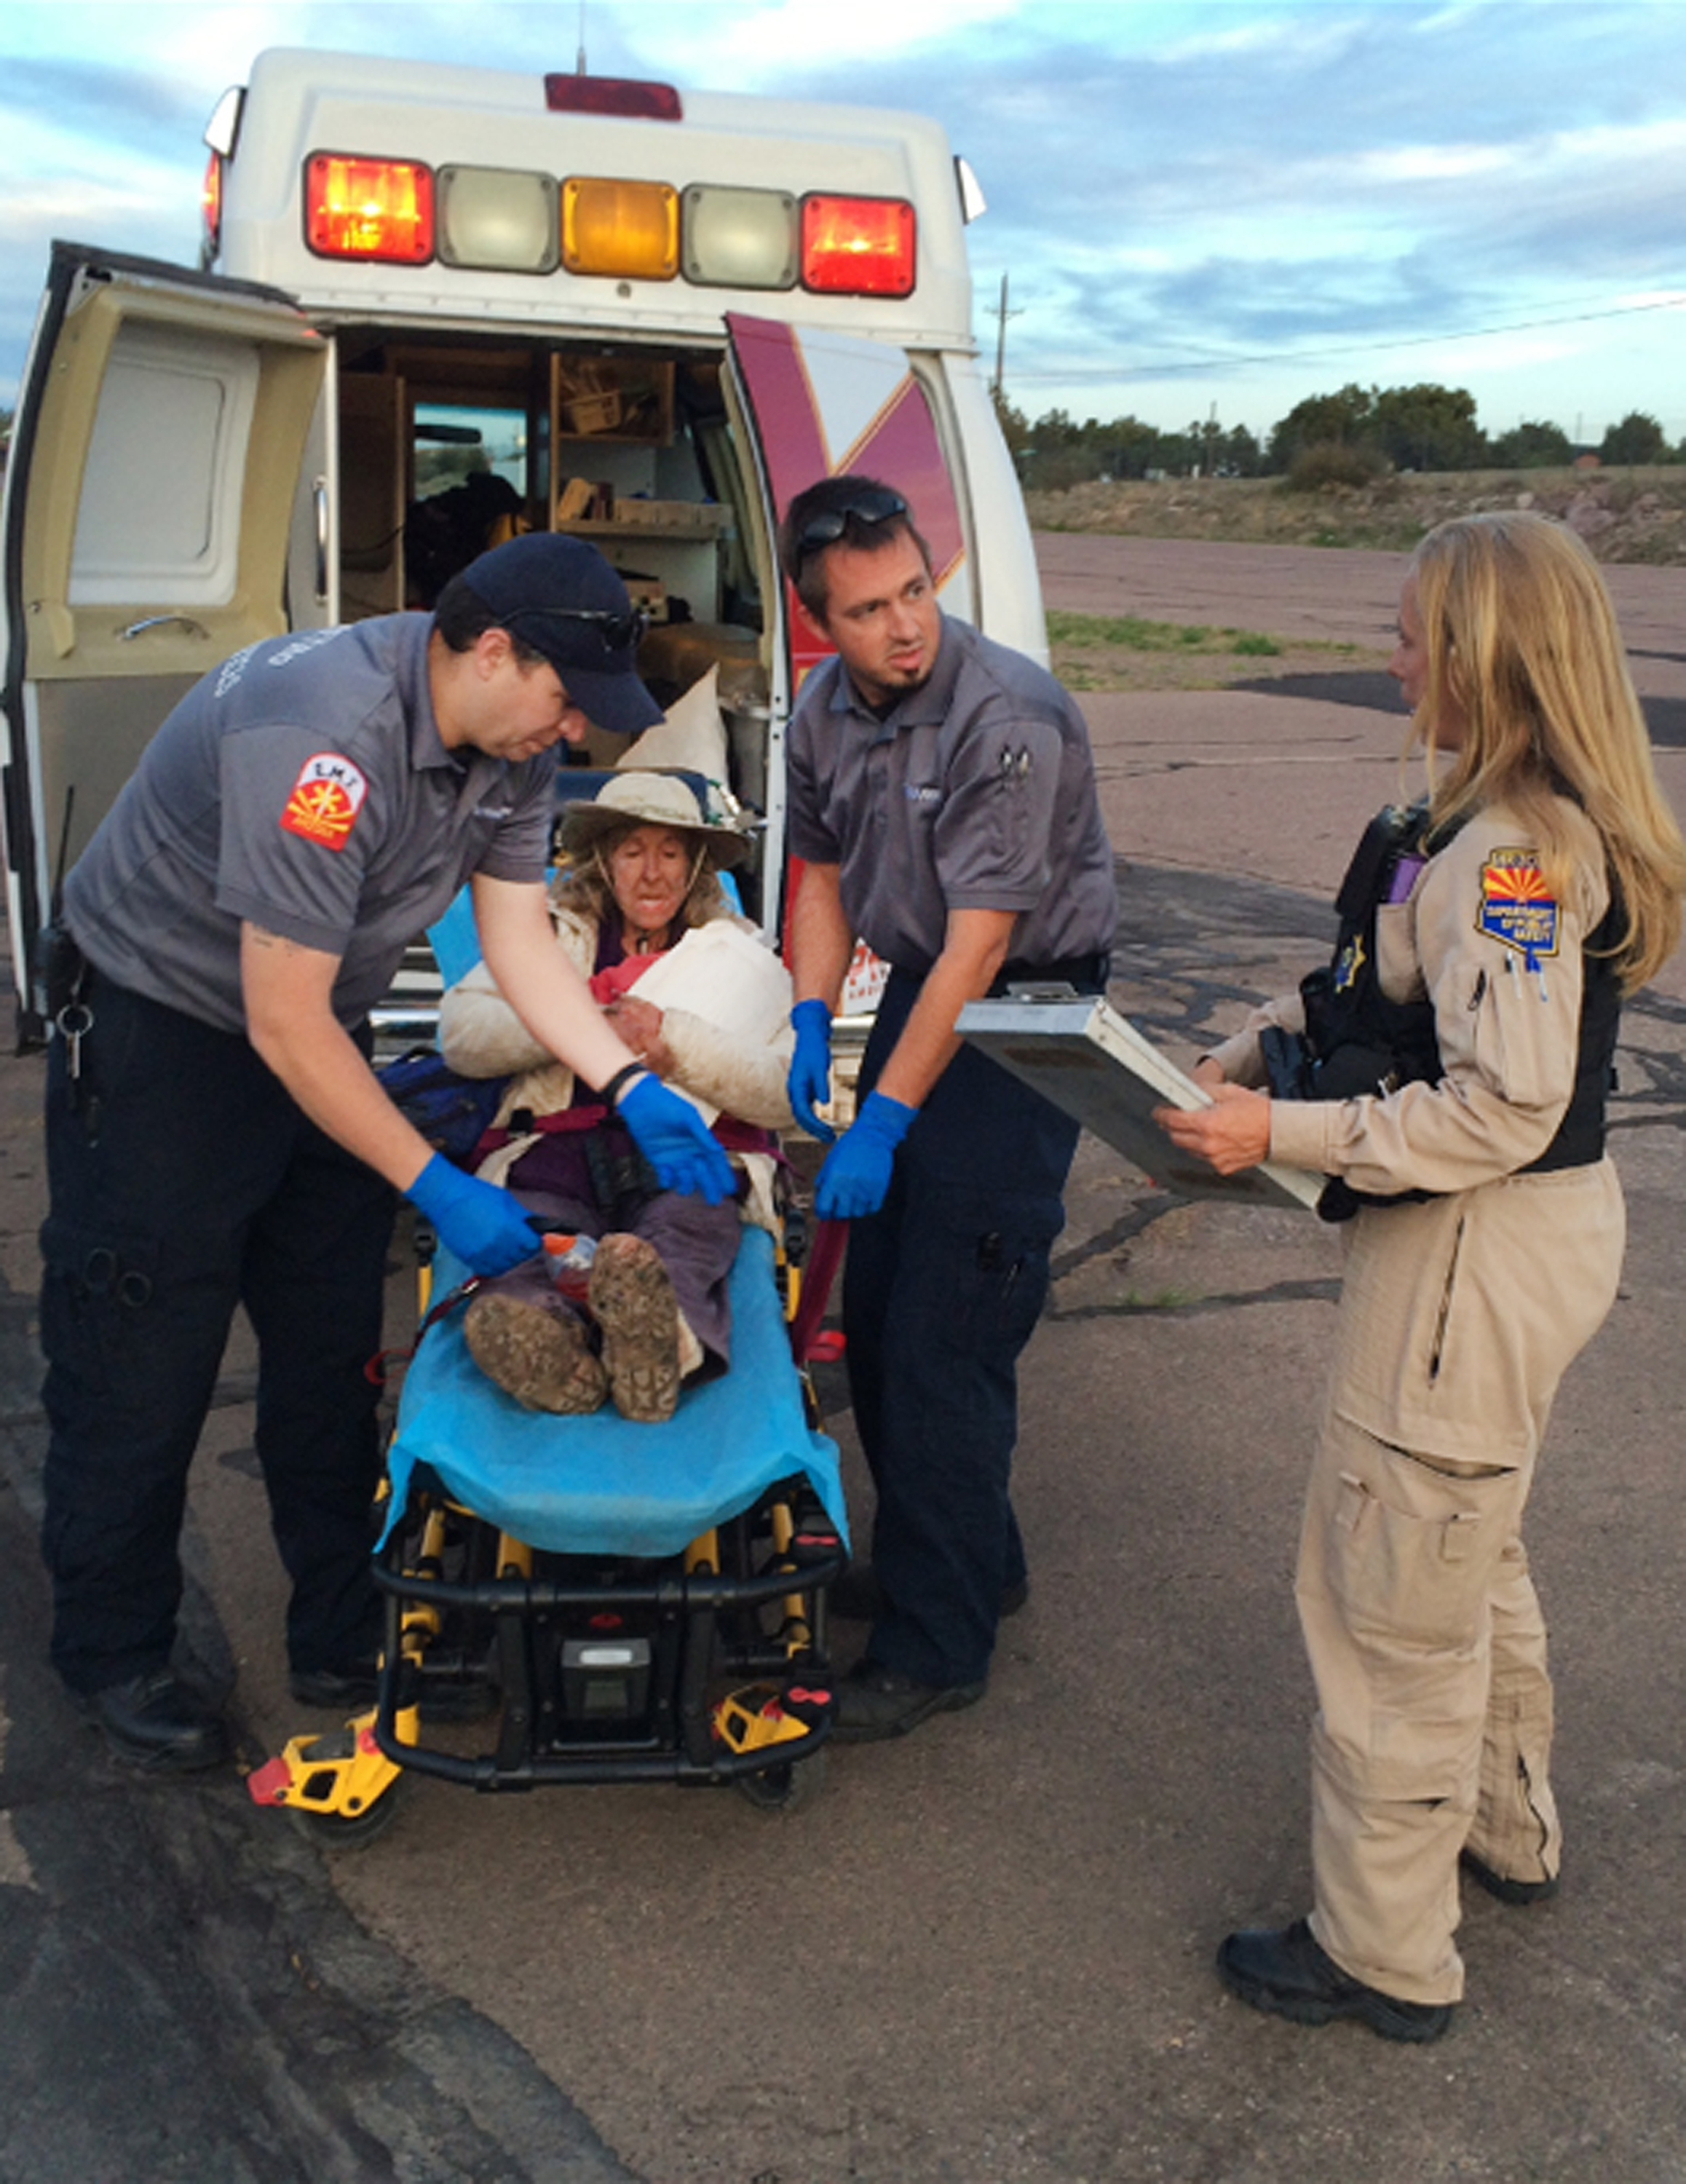 This photo provided by Arizona Department of Public Safety shows an ambulance taking Ann Rodgers, 72 , to safety on April 9, 2016 after she was lost in the forest for nine days.